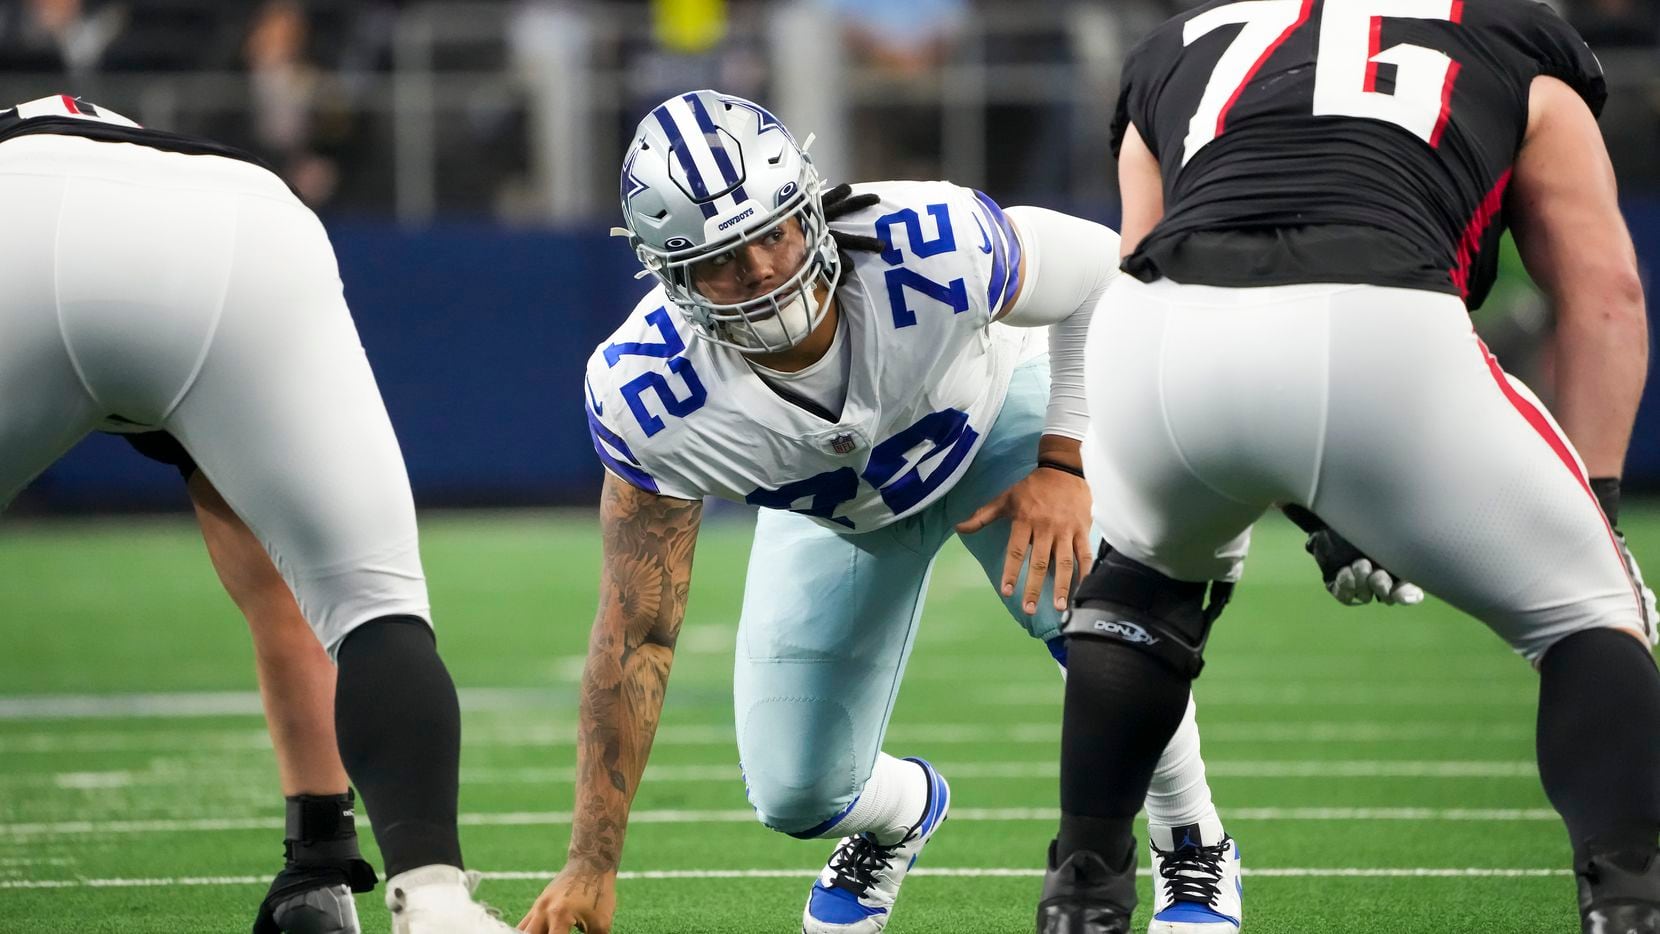 Dallas Cowboys defensive tackle Trysten Hill (72) lines up against Atlanta Falcons offensive tackle Kaleb McGary (76) during the first half of an NFL football game at AT&T Stadium on Sunday, Nov. 14, 2021, in Arlington.